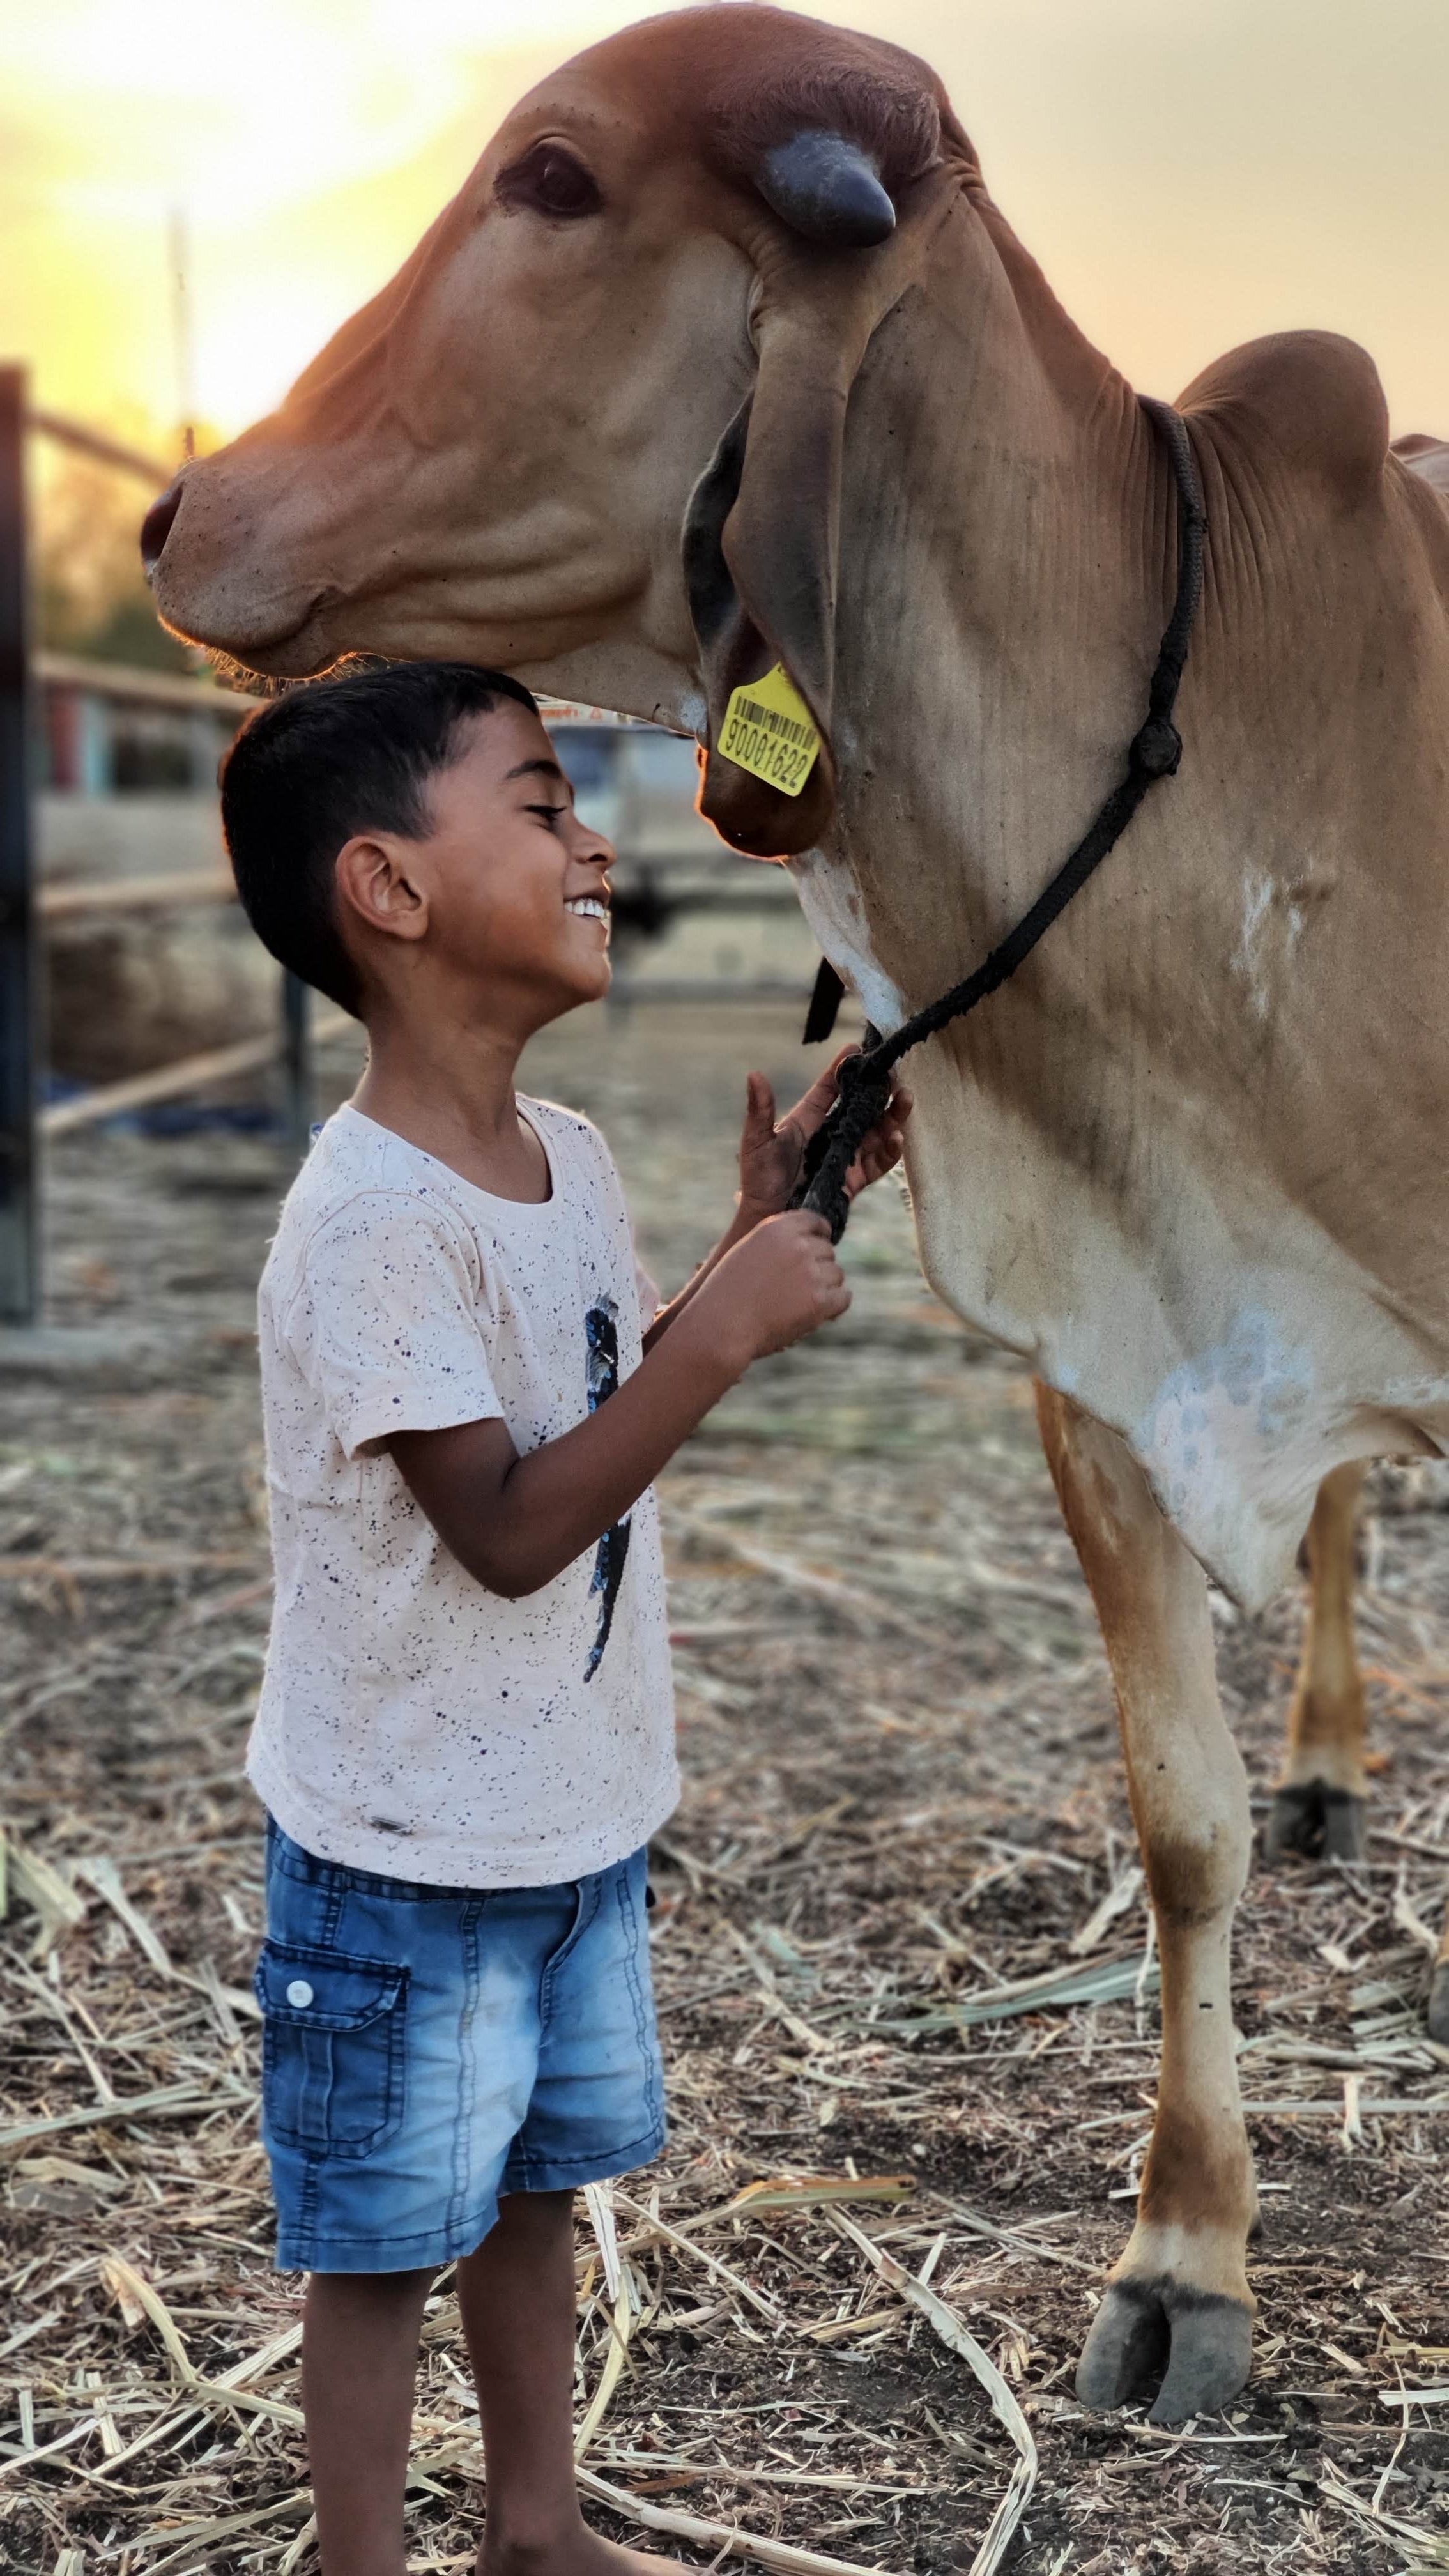 Bovine Colostrum, Colostrum, Cheek, Kharvas, Integrated Farming, Desi Cow based Natural farming, Rural India and the cow, Farmer and his cow, two brothers, two brothers organic farm, IGg foods, Leaky gut foods, Colostrum powder